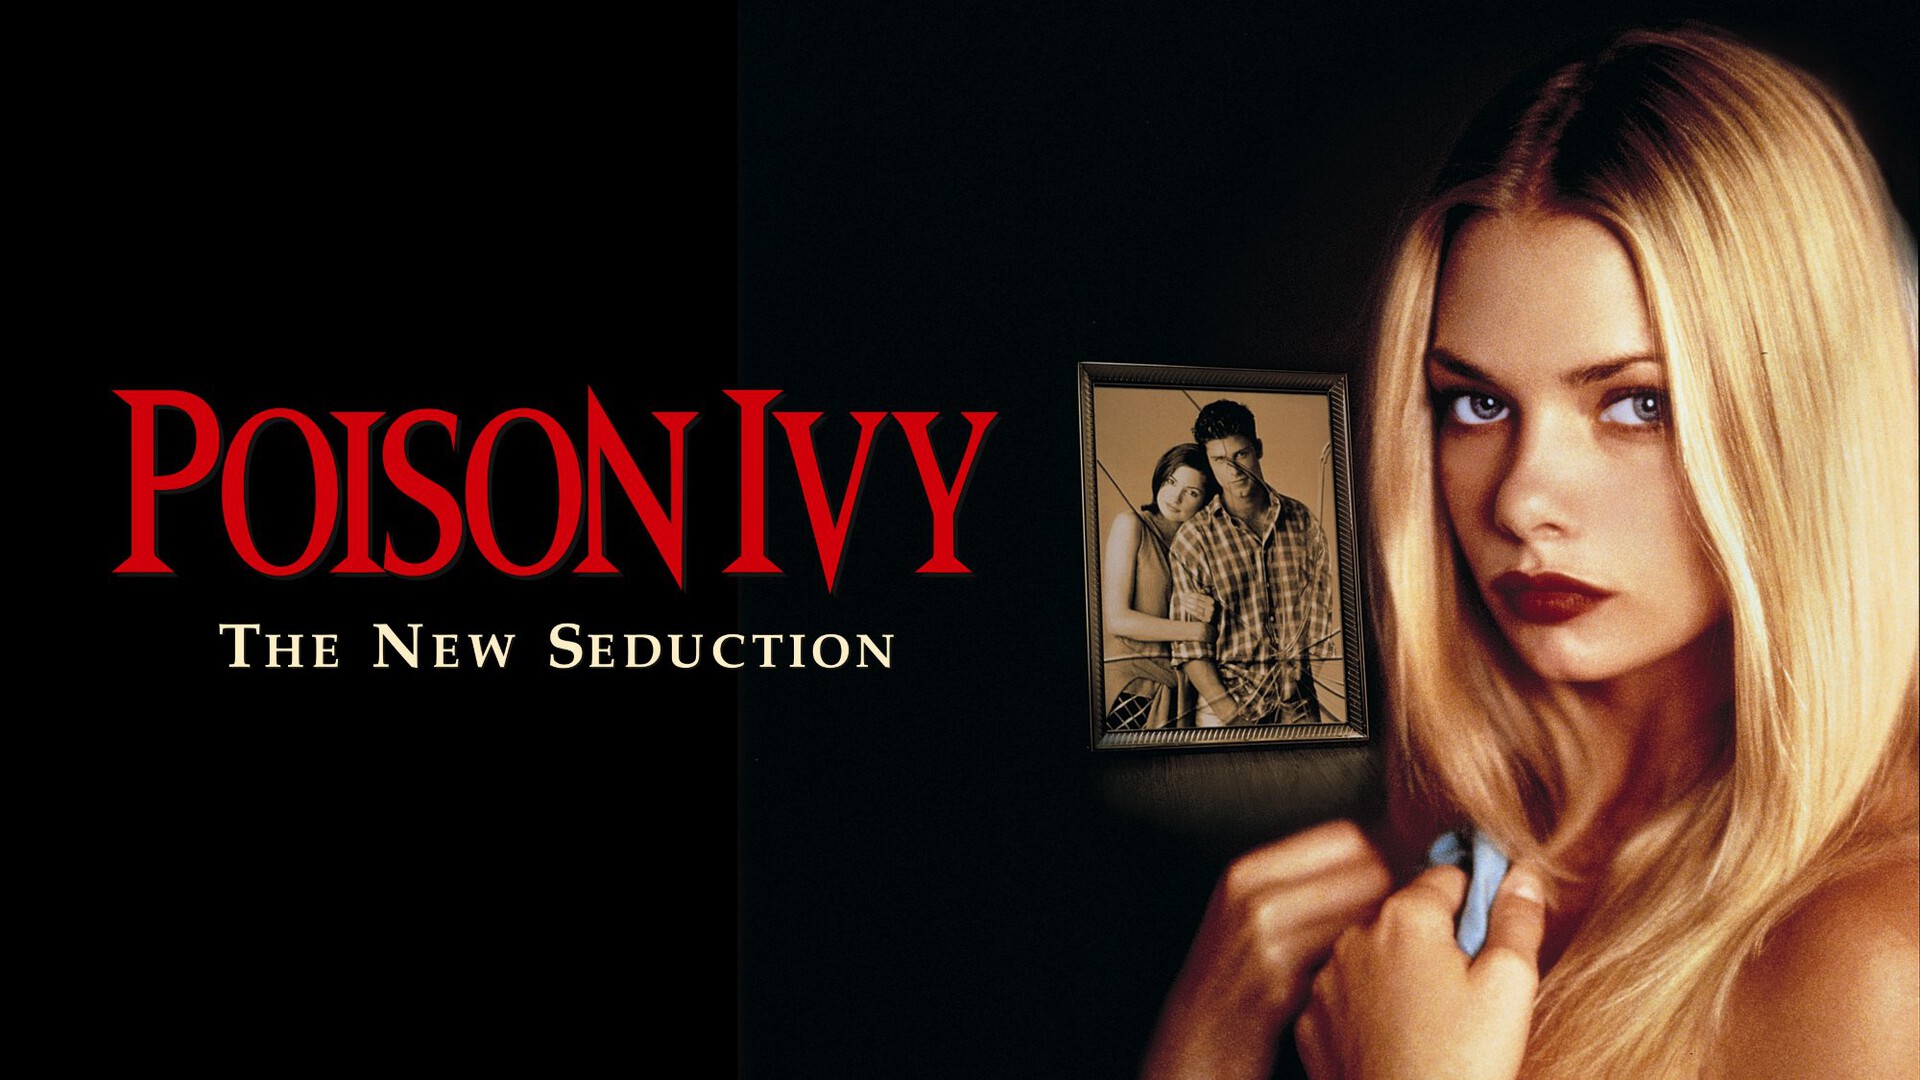 ajay sonar recommends soft ivy 3 movie pic